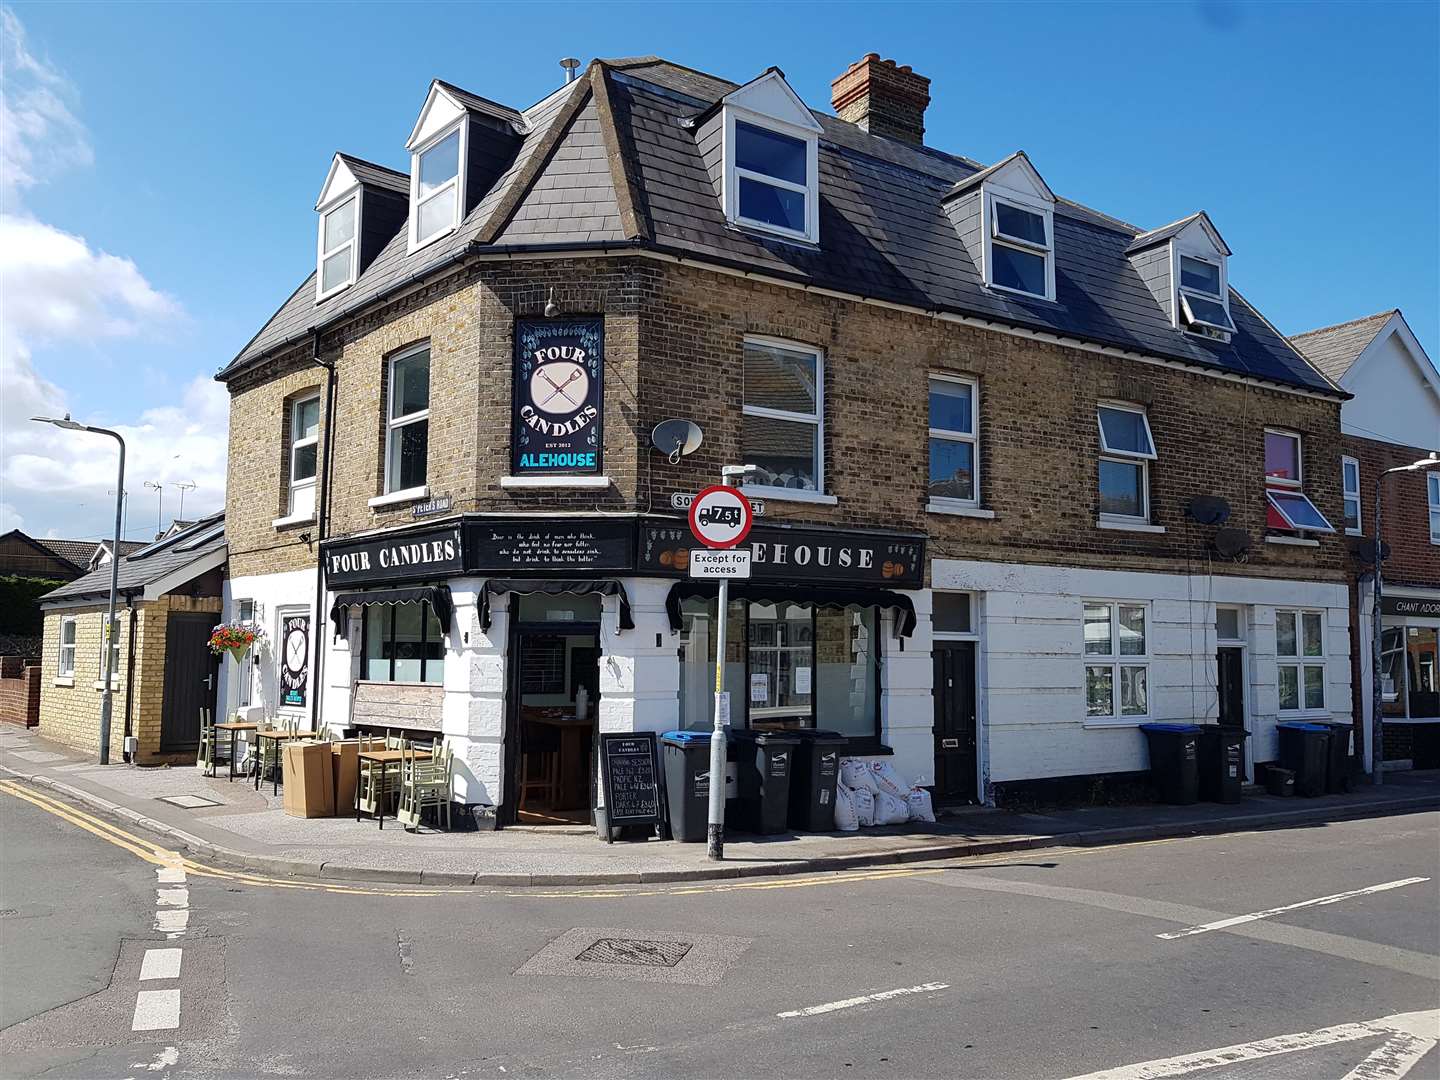 The Four Candles pub is a 10 minute walk from Broadstairs railway station